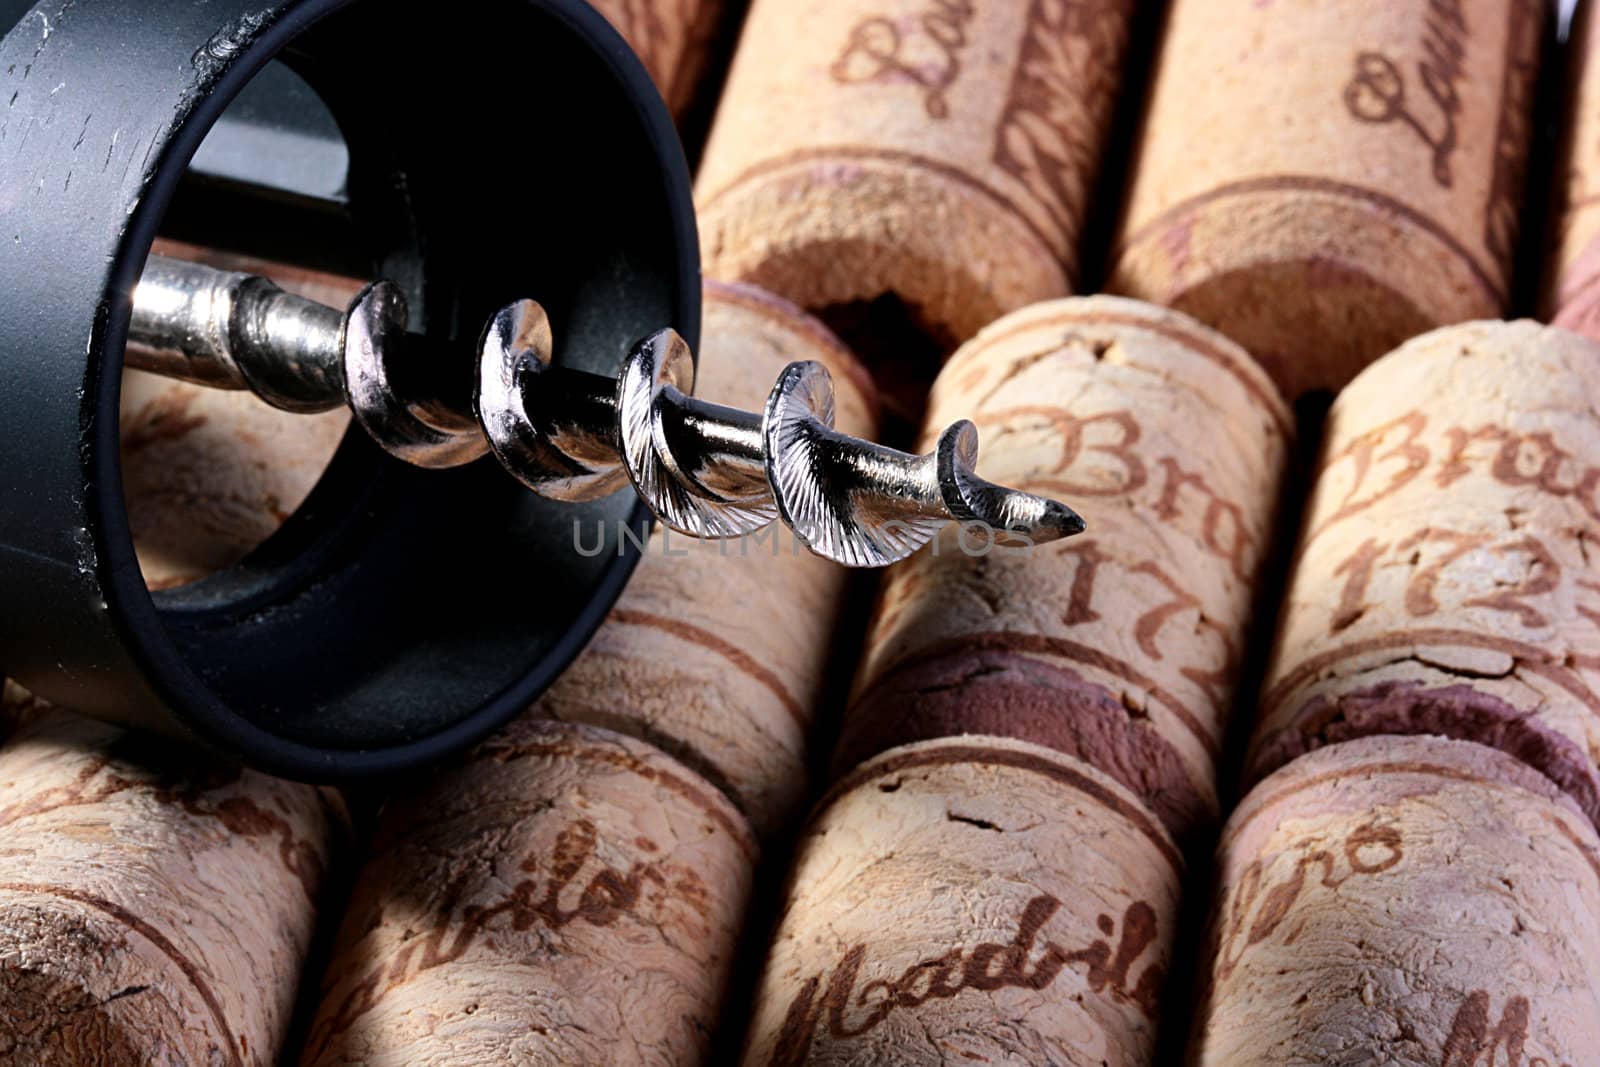 Corkscrew and stoppers from wine bottles on a background.